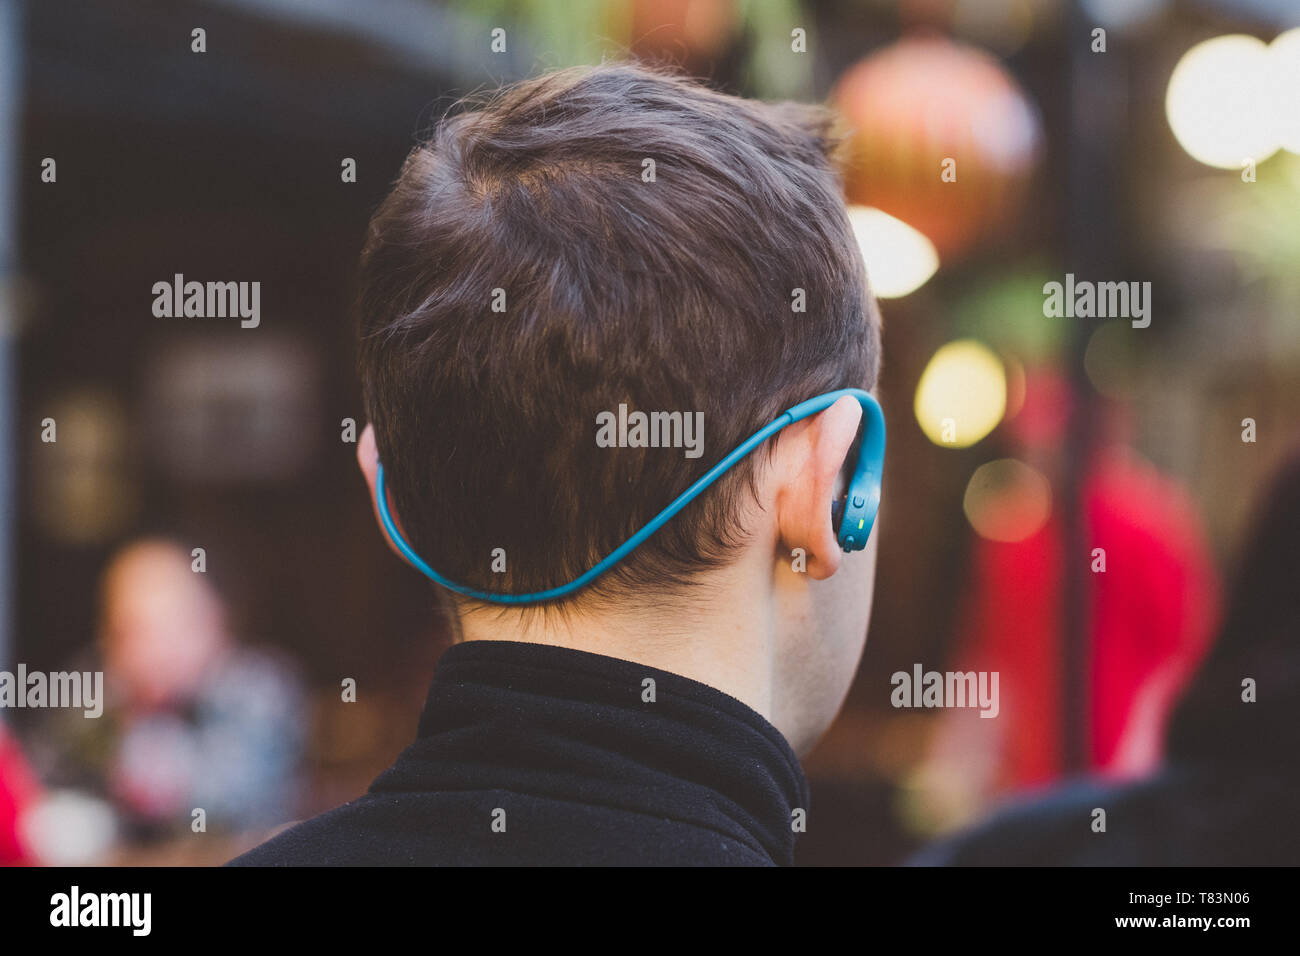 Back view of a young man with headphones posing in the city streets Stock Photo